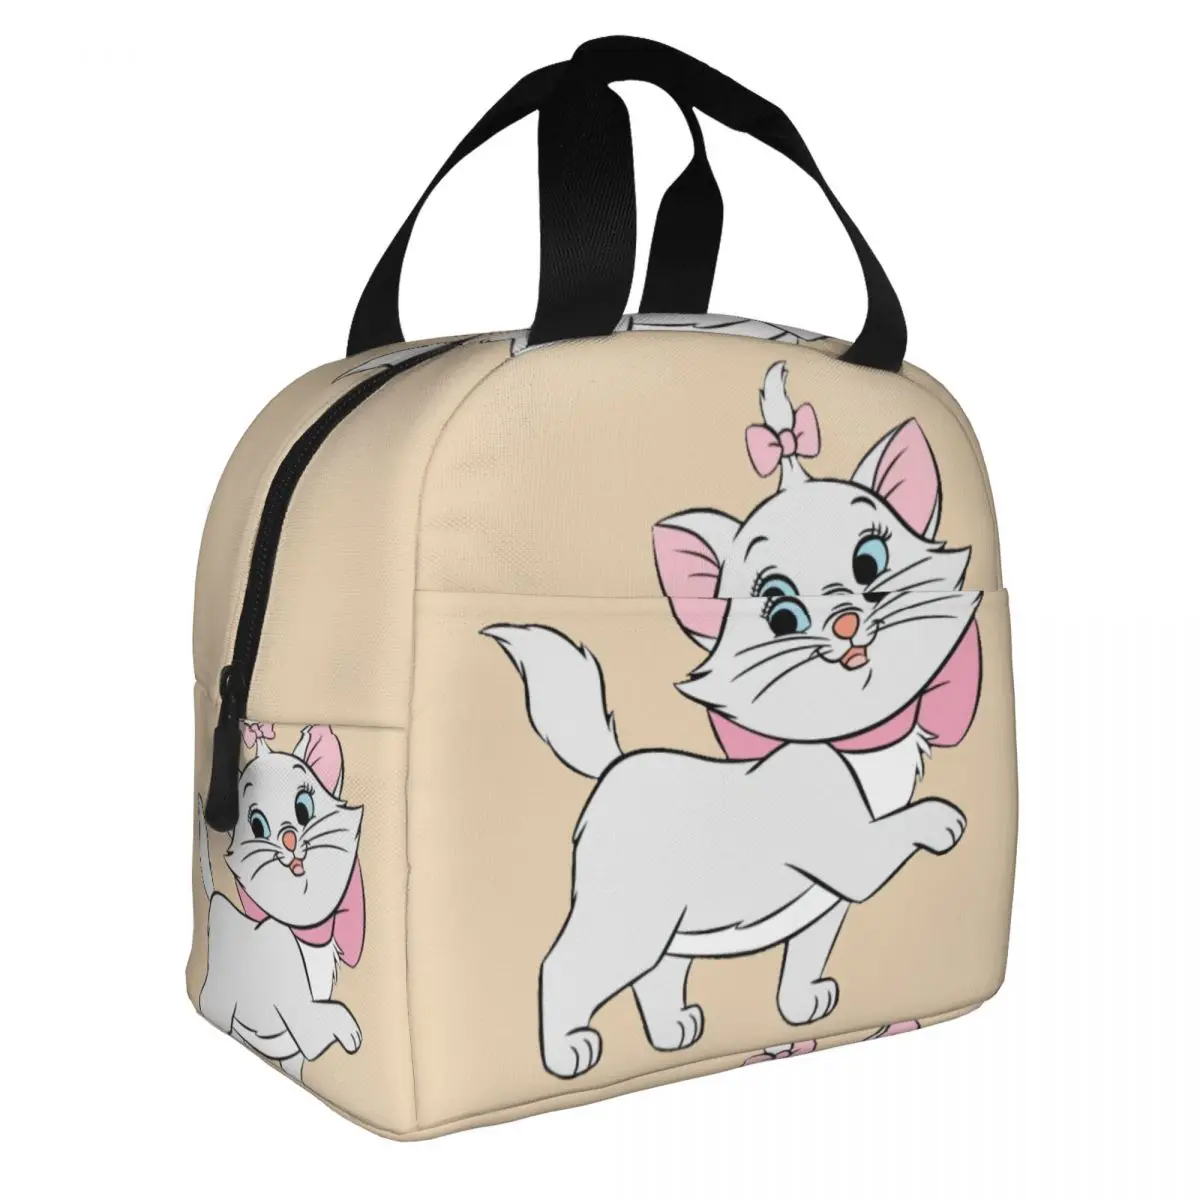 

Cartoon Marie Insulated Lunch Tote Bag For Women Cute Cat Kitten Resuable Thermal Cooler Bento Box For Work School Food Bags